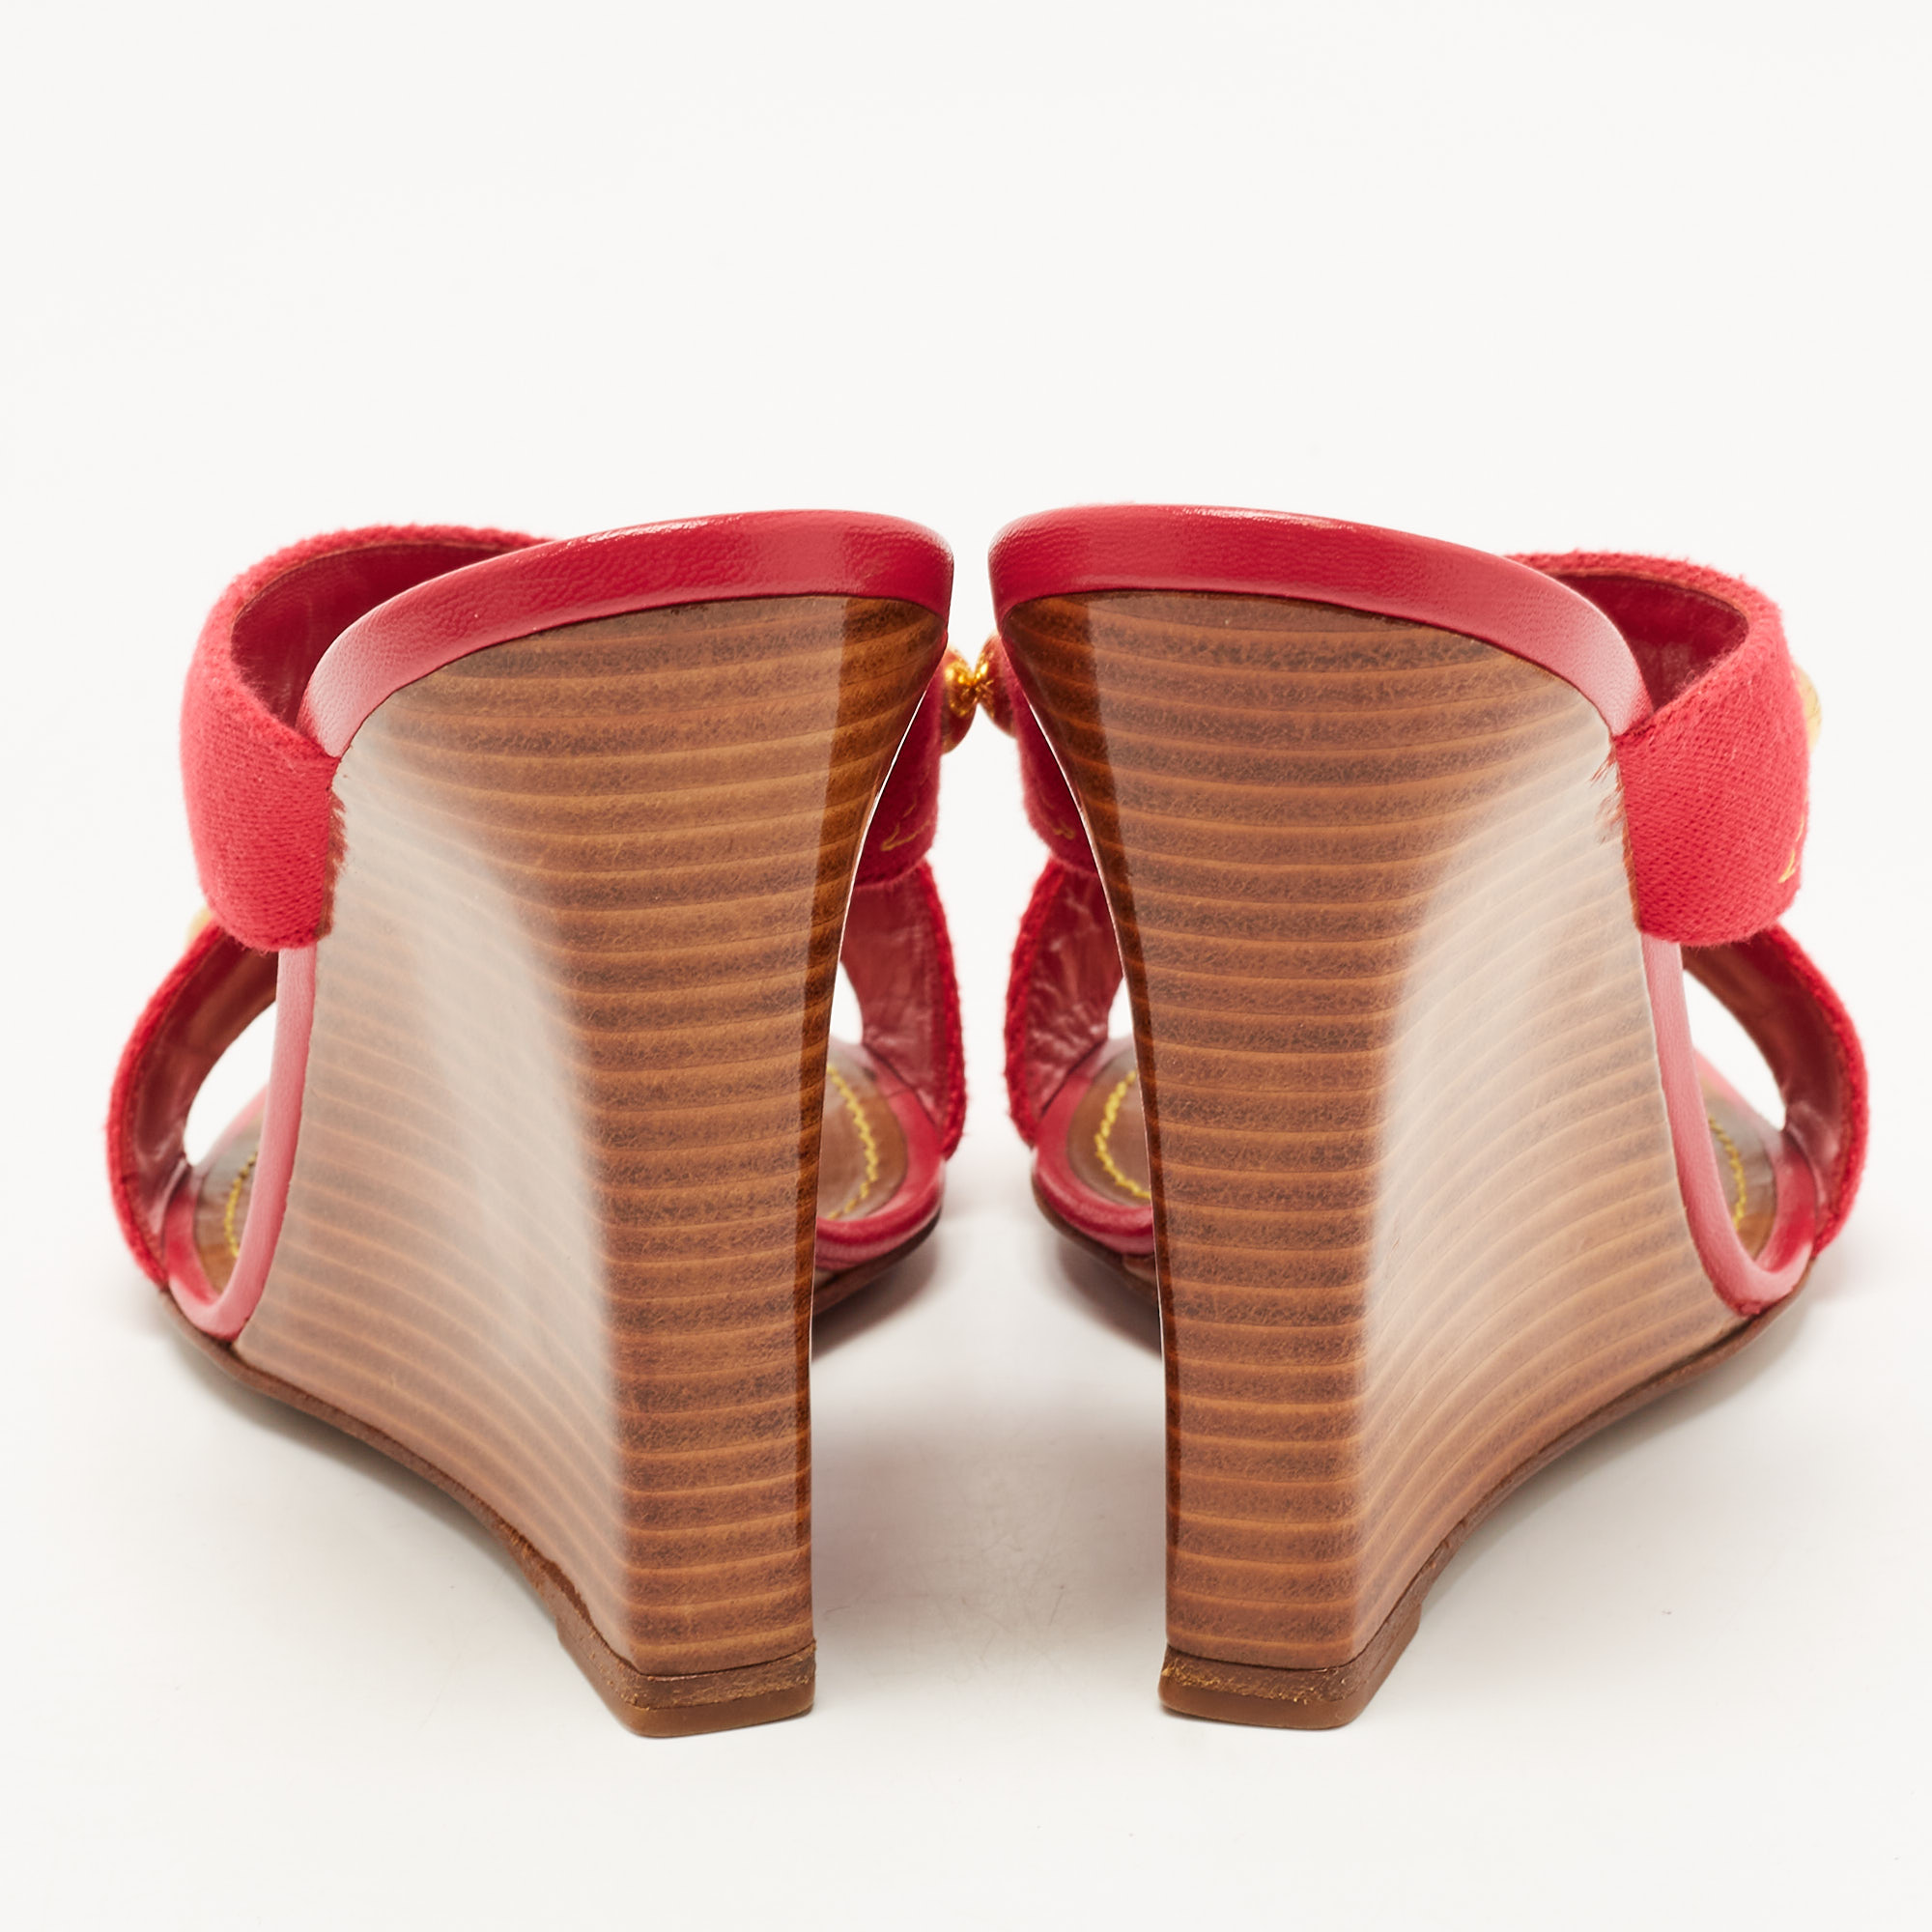 Louis Vuitton Red Canvas Studded Crosscross Strap Wedge Sandals Size 38